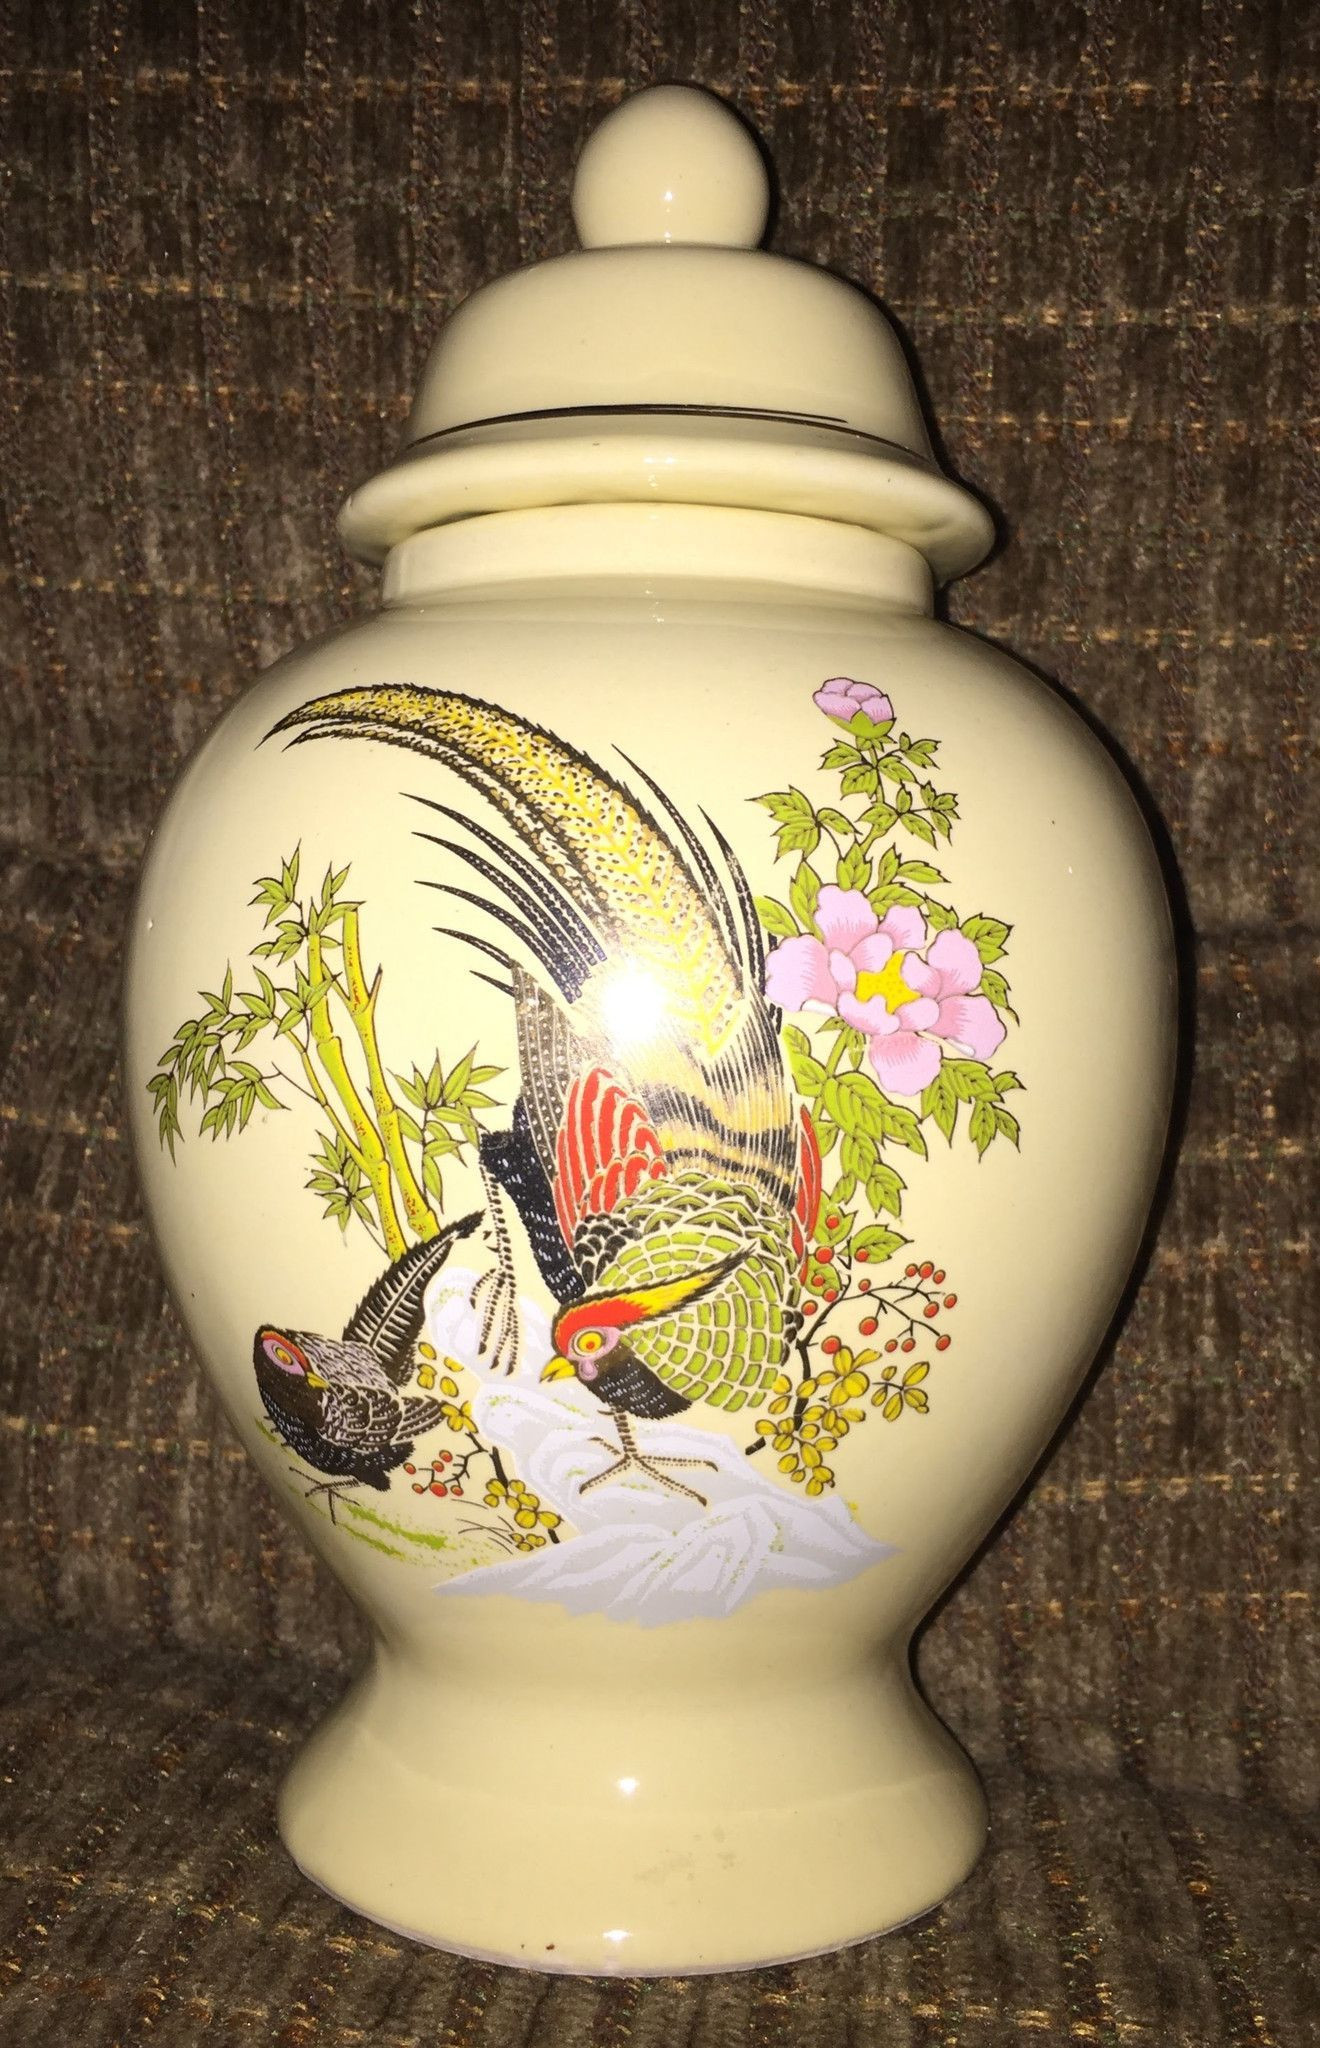 22 Fantastic Cherry Blossom Vase 2024 free download cherry blossom vase of vintage asian vase jar hand painted pinterest asian vases and pertaining to vintage collectible asian vase jar hand painted two birds bamboo and flowers